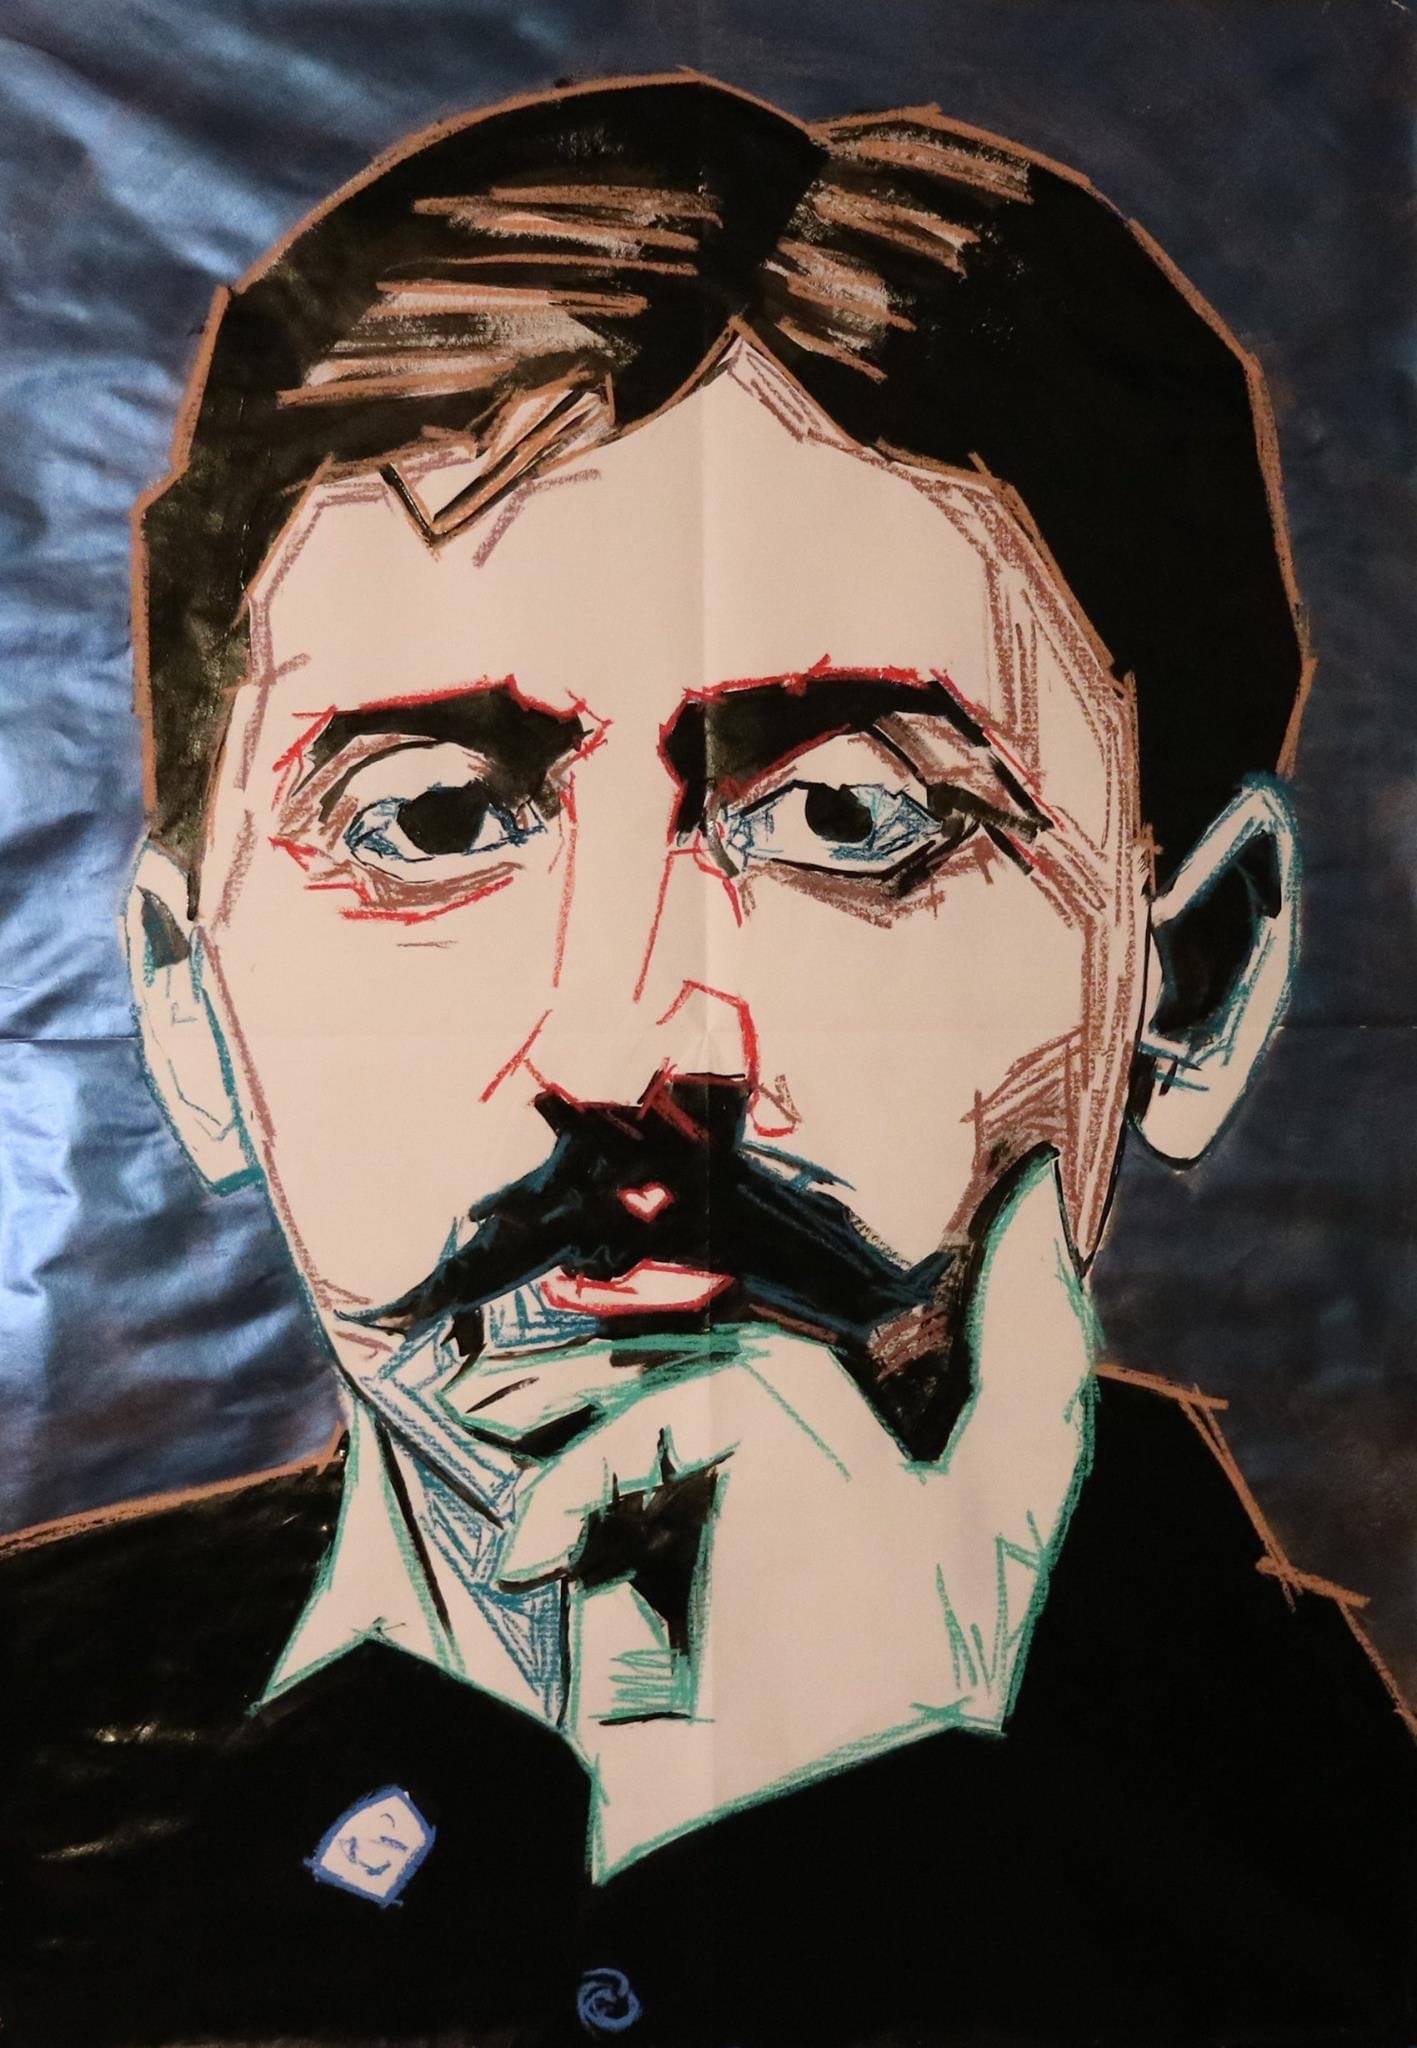 Image of Marcel Proust by Restivo